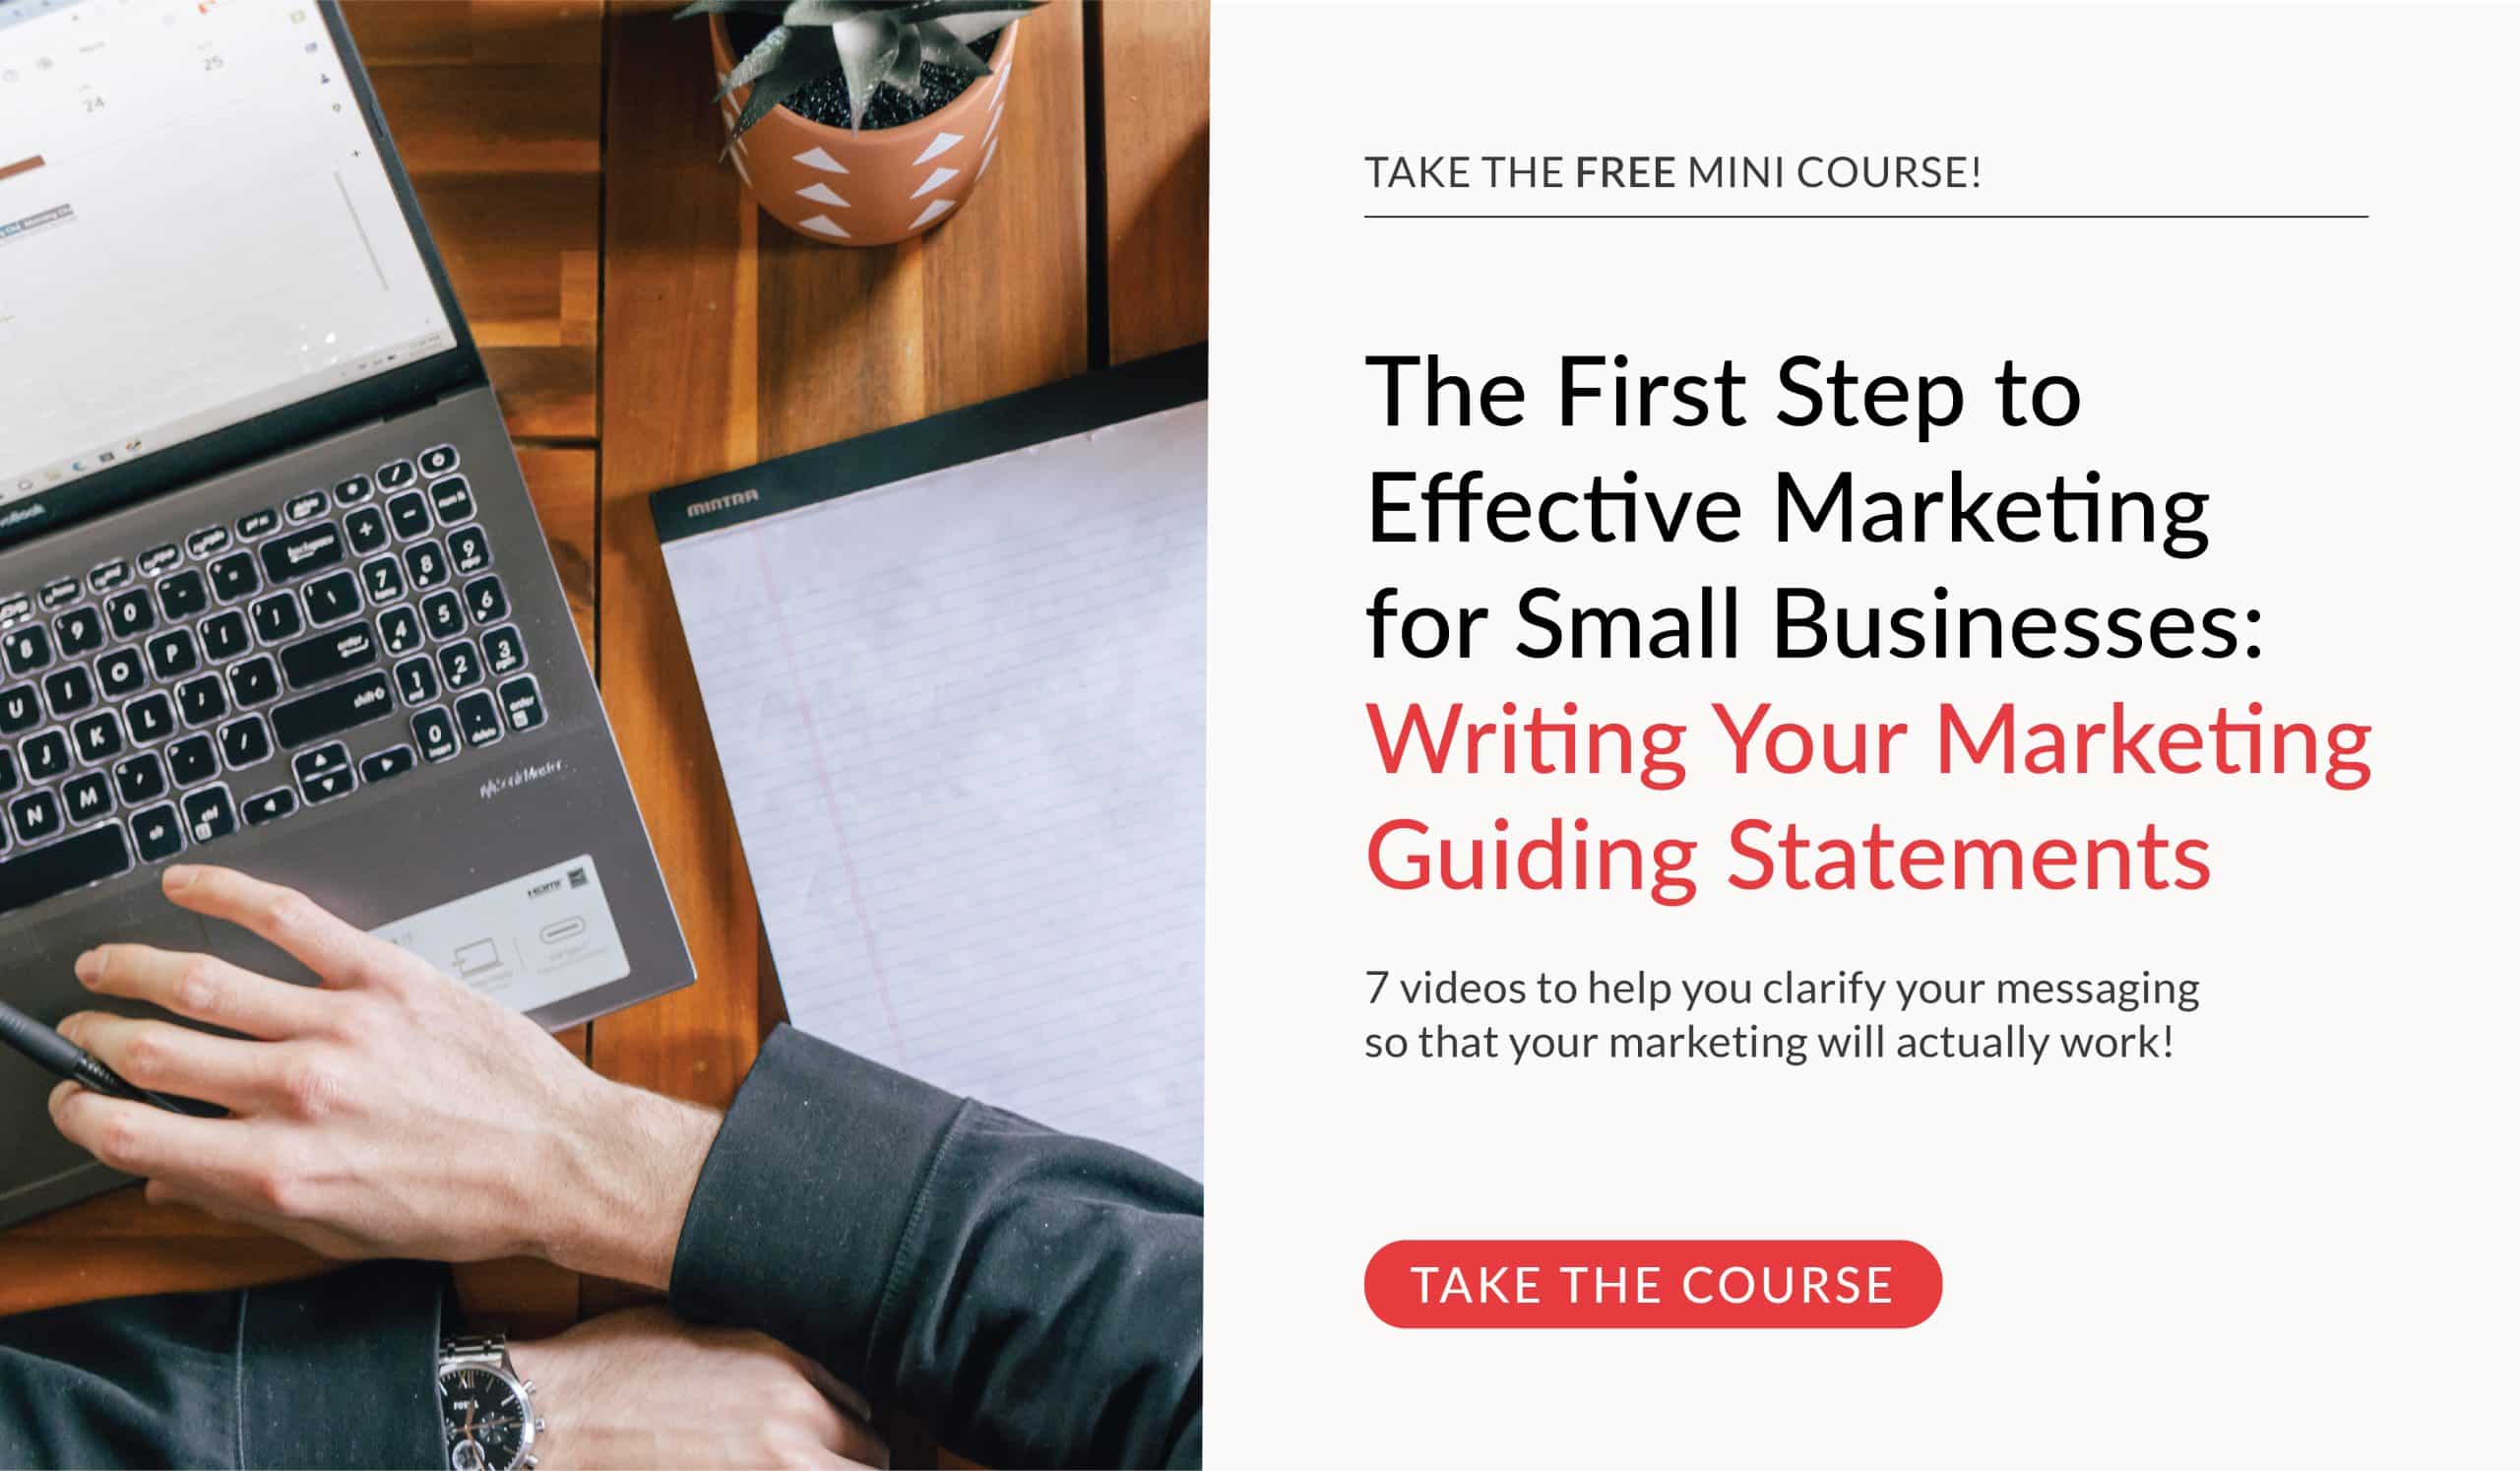 Take the FREE Mini Course! The First Step to Effective Marketing for Small Businesses: Writing Your Marketing Guiding Statements.